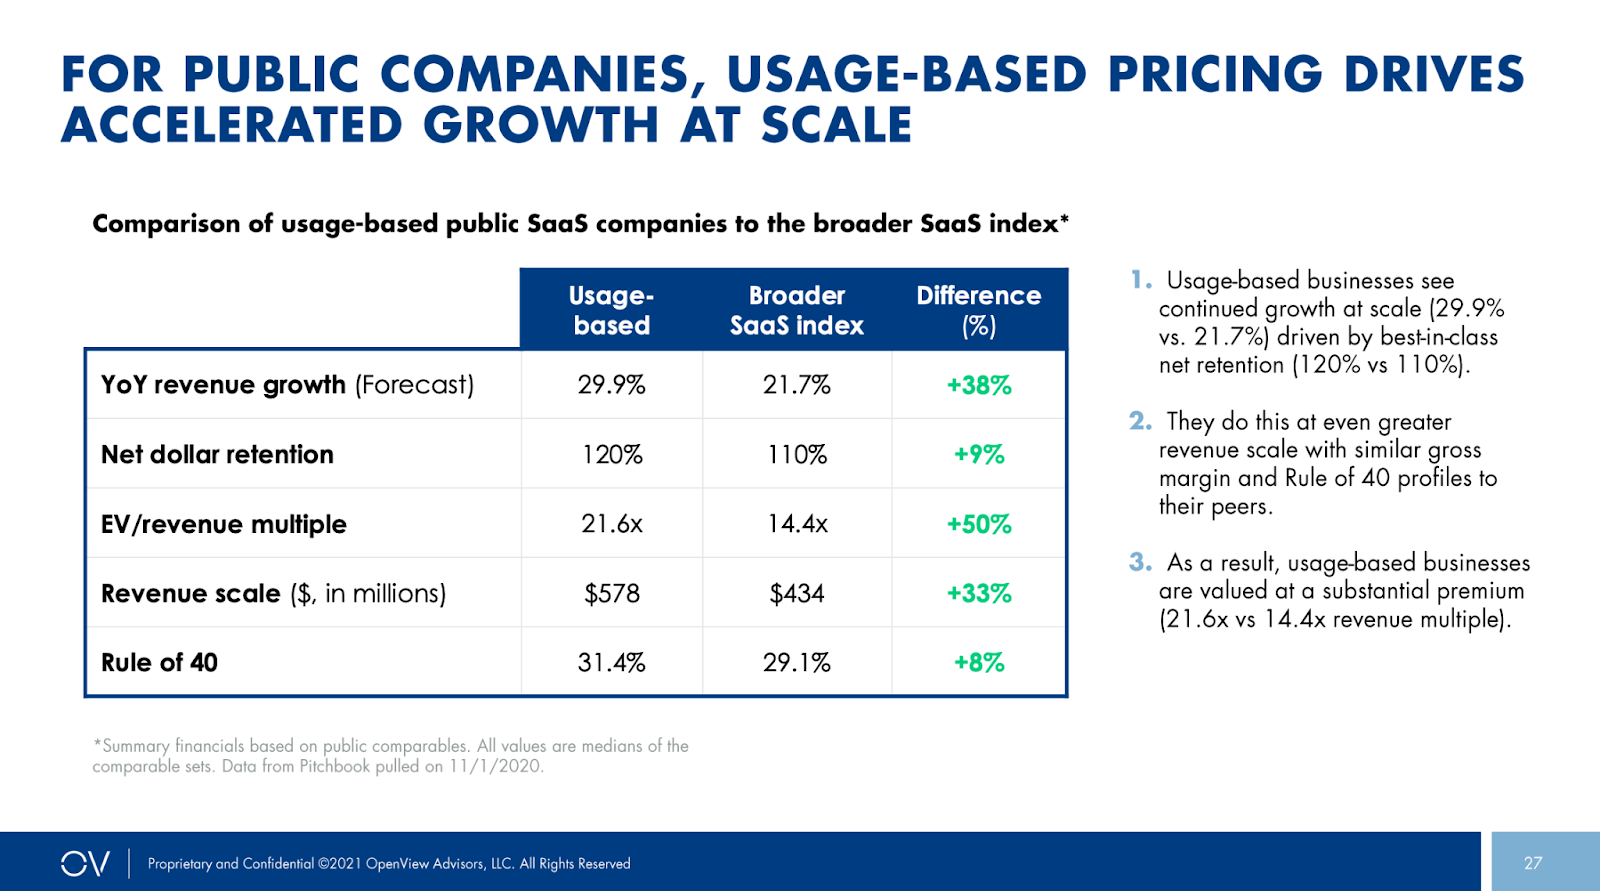 Image showing the accelerated growth comparison of Usage-based public SaaS companies to the broader SaaS index.